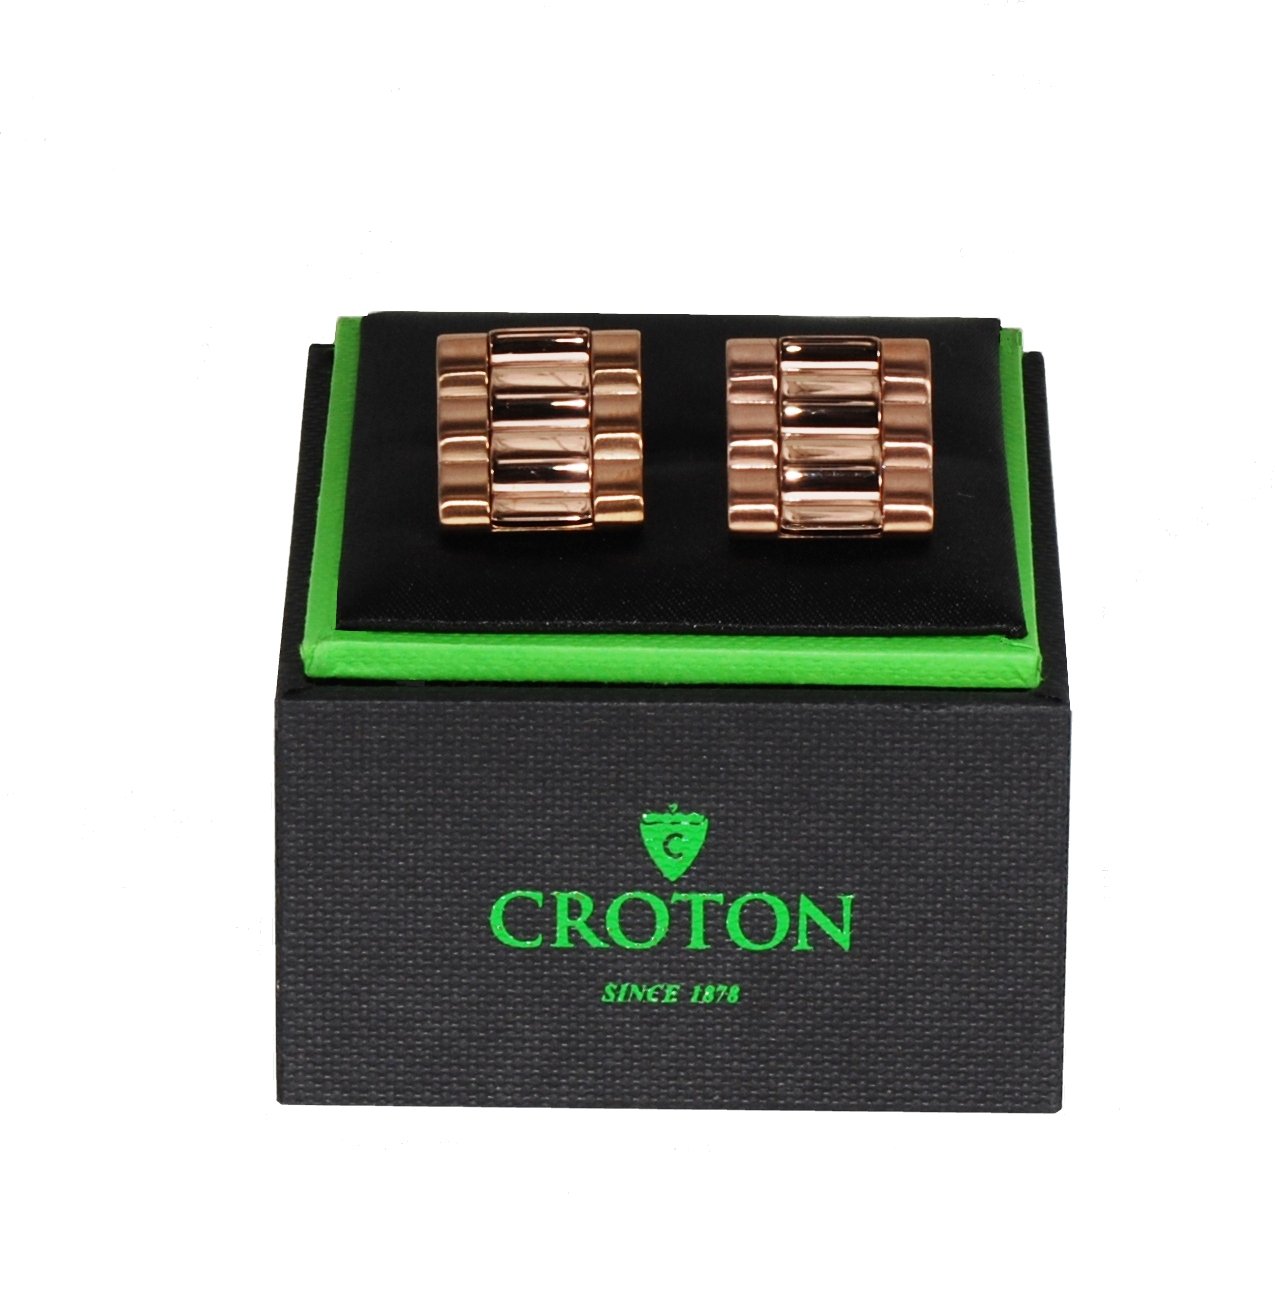 Croton Stainless Steel Rosegold Cuff Links - CROTON GROUP